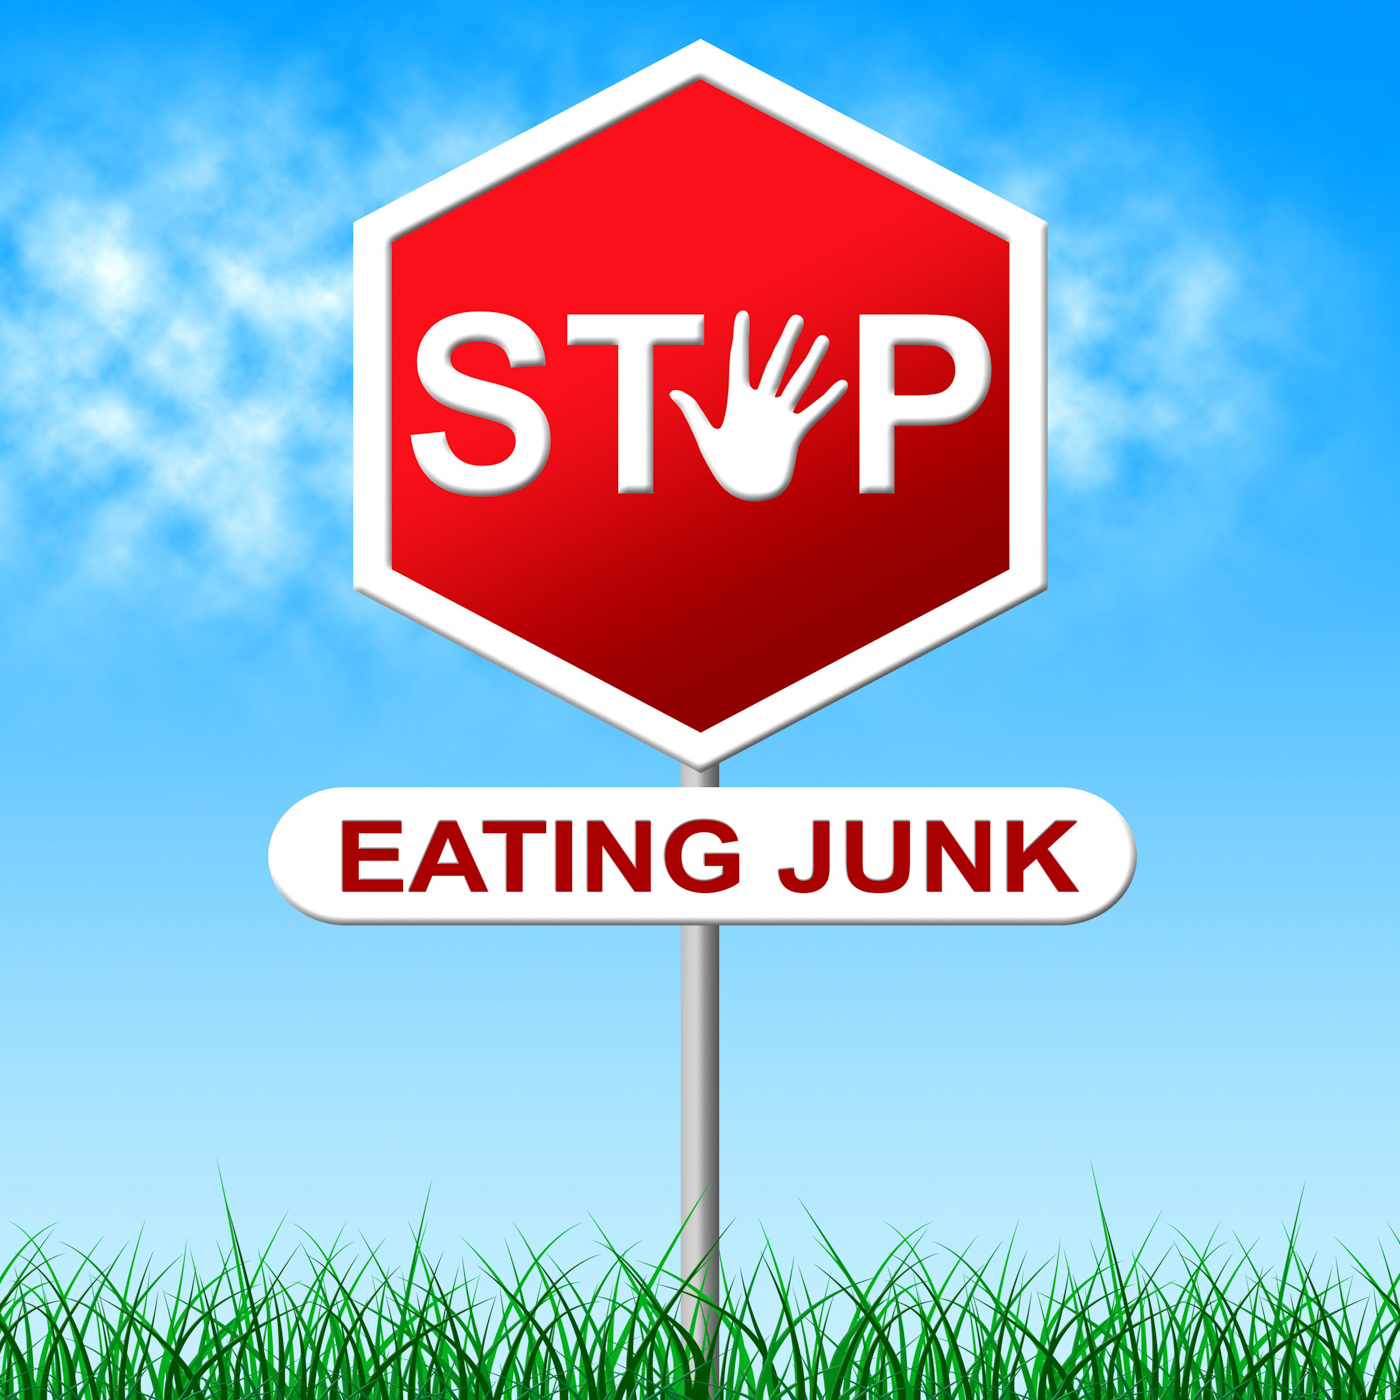 Stop eating junk indicates fast food and control photo